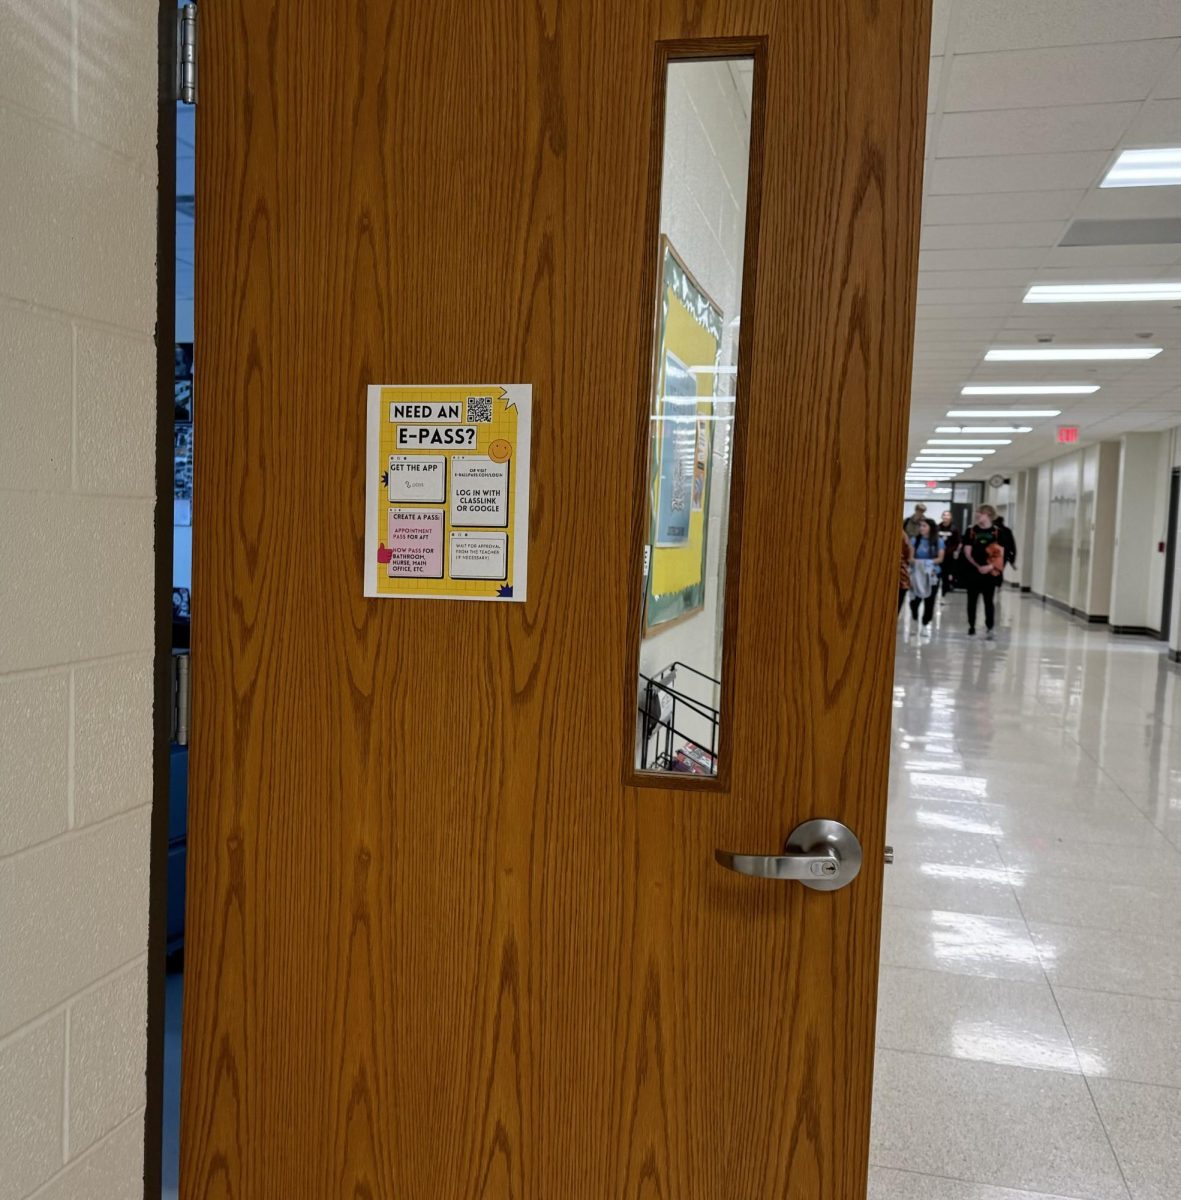 Signs hang around the school to educate students on how to use the new e-hall pass system